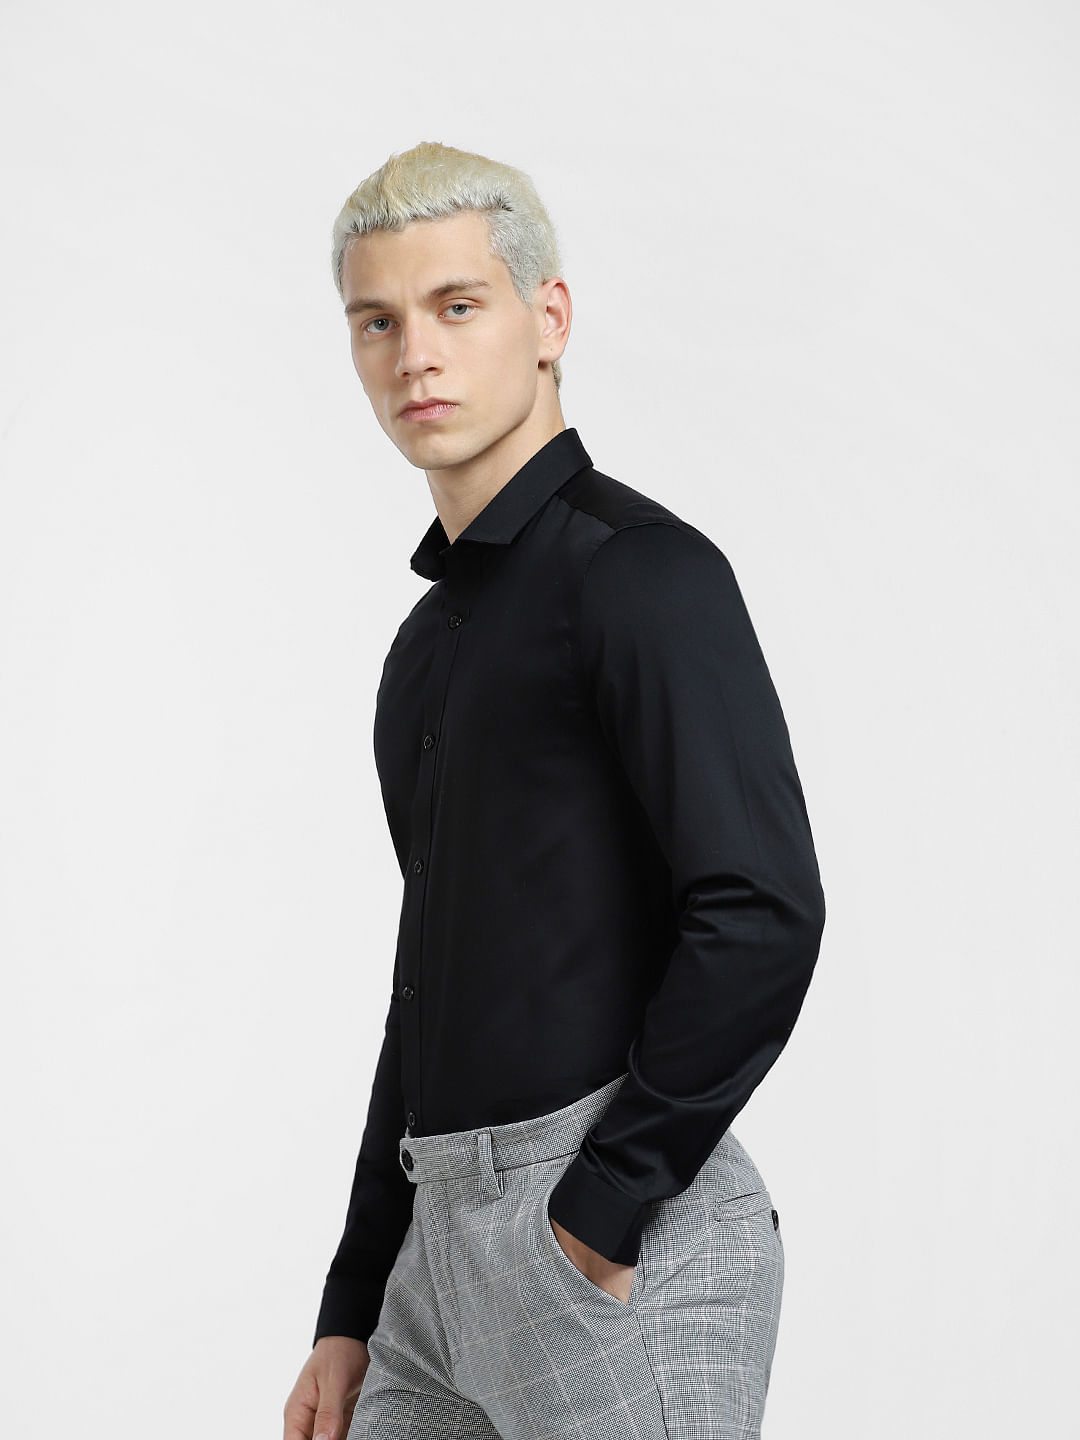 10 Best Styling Ideas for Black Shirt Combination Pants 2023